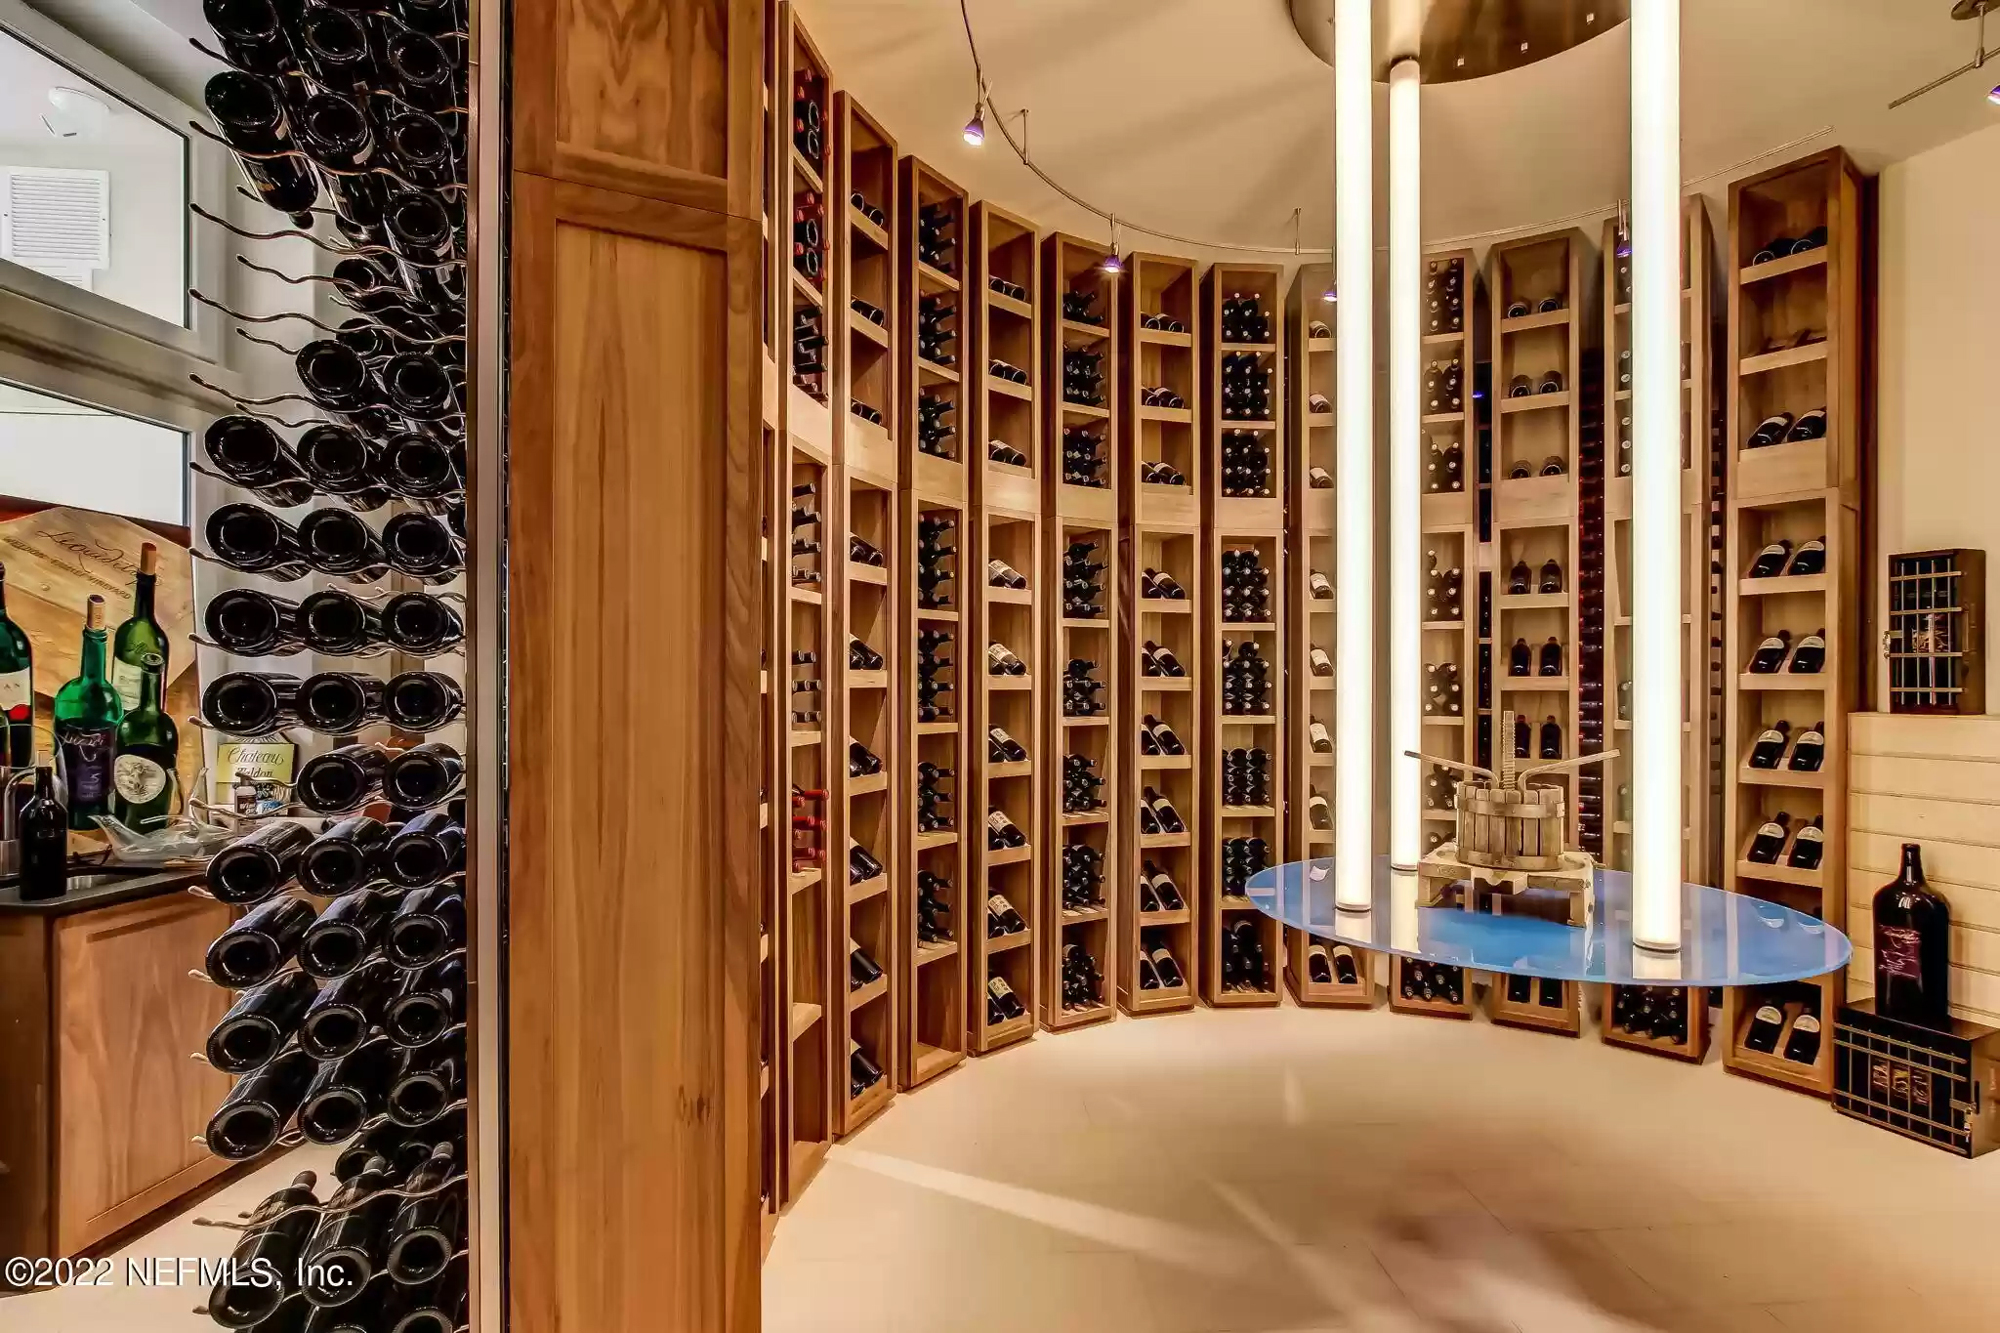 The wine cellar is shown in this photo from the home's Northeast Florida MLS listing.